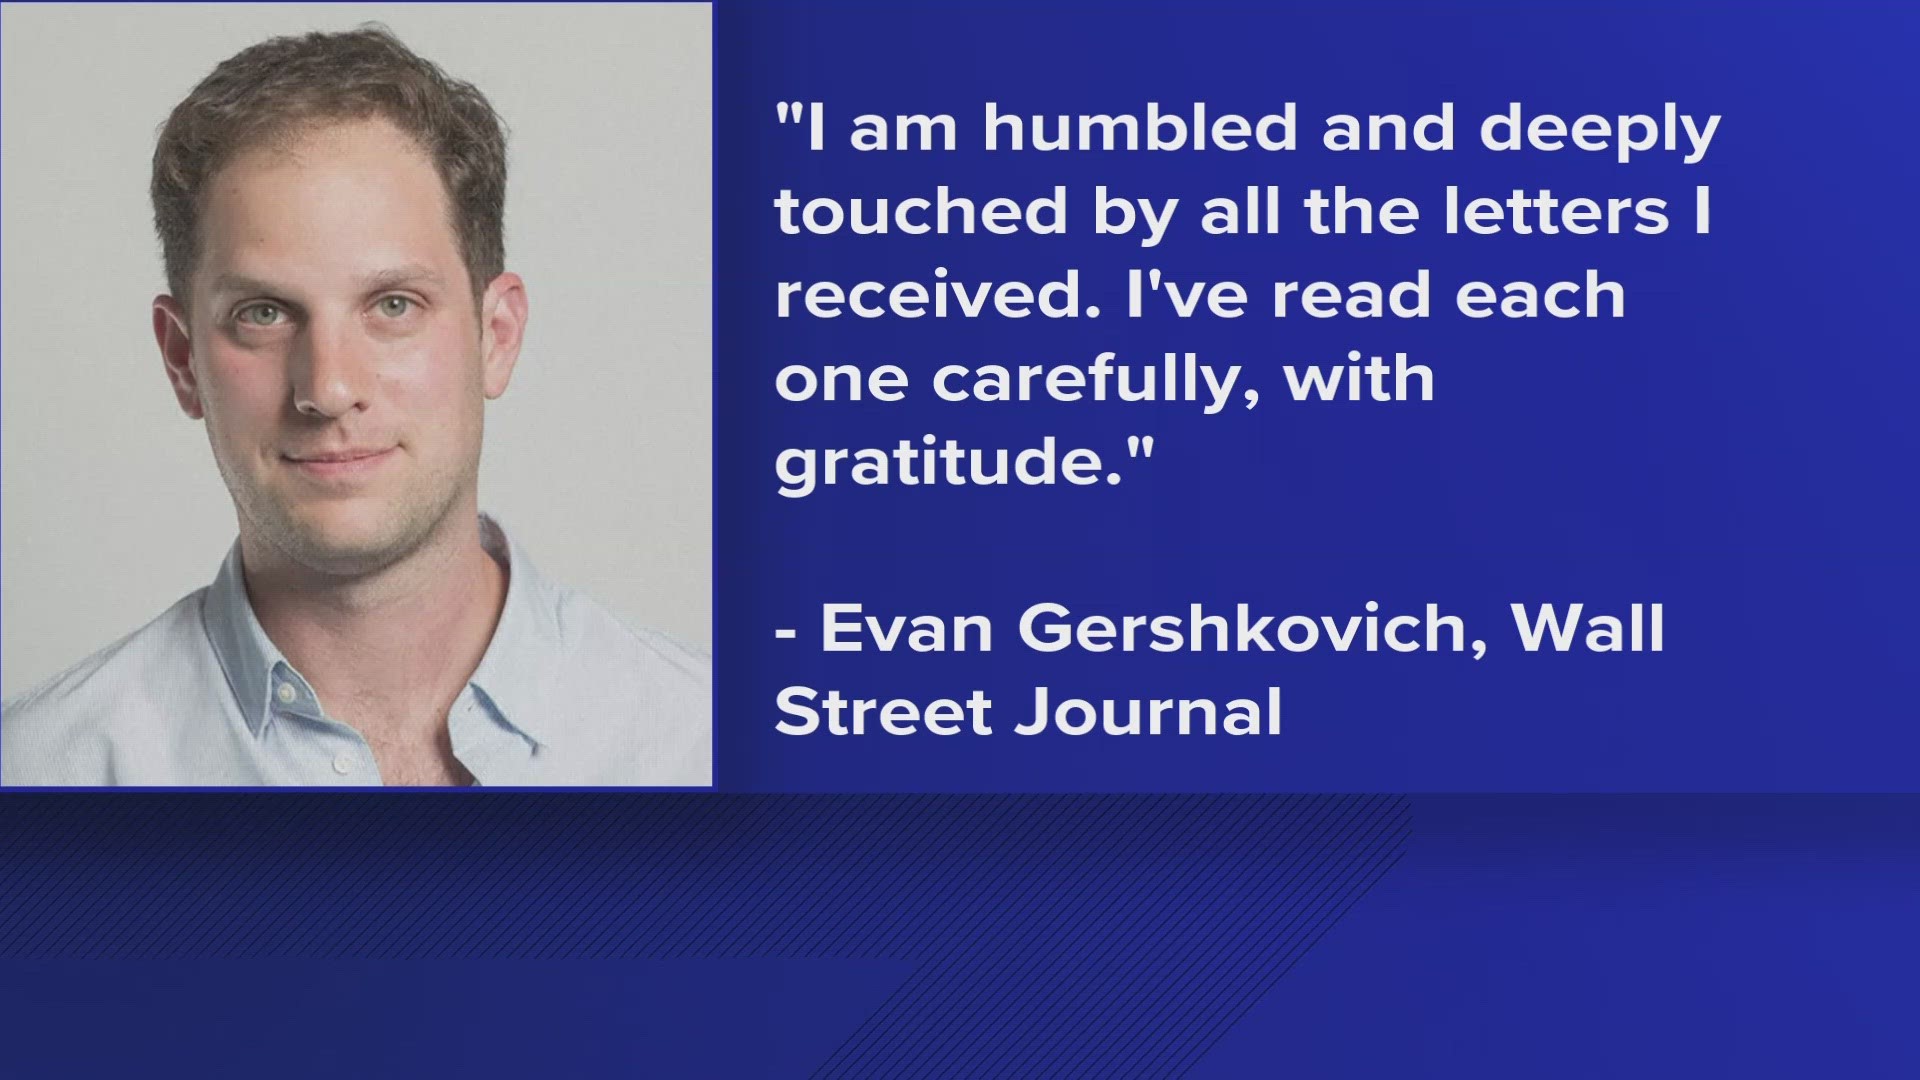 Evan Gershkovich expressed his gratitude in a statement on Friday.